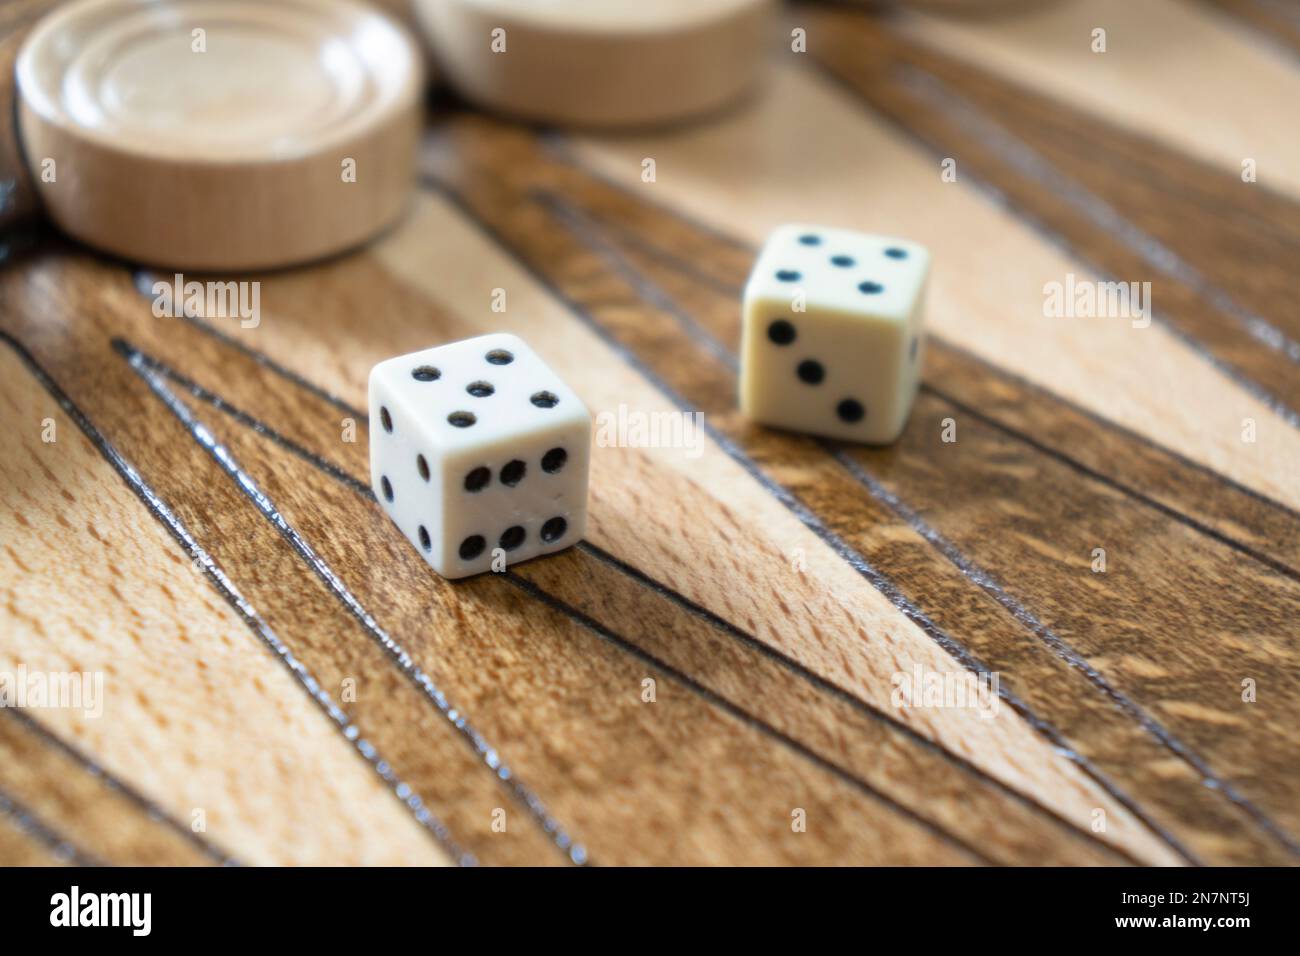 Closeup of backgammon board game. Wooden backgammon board with checkers and dice pair Stock Photo